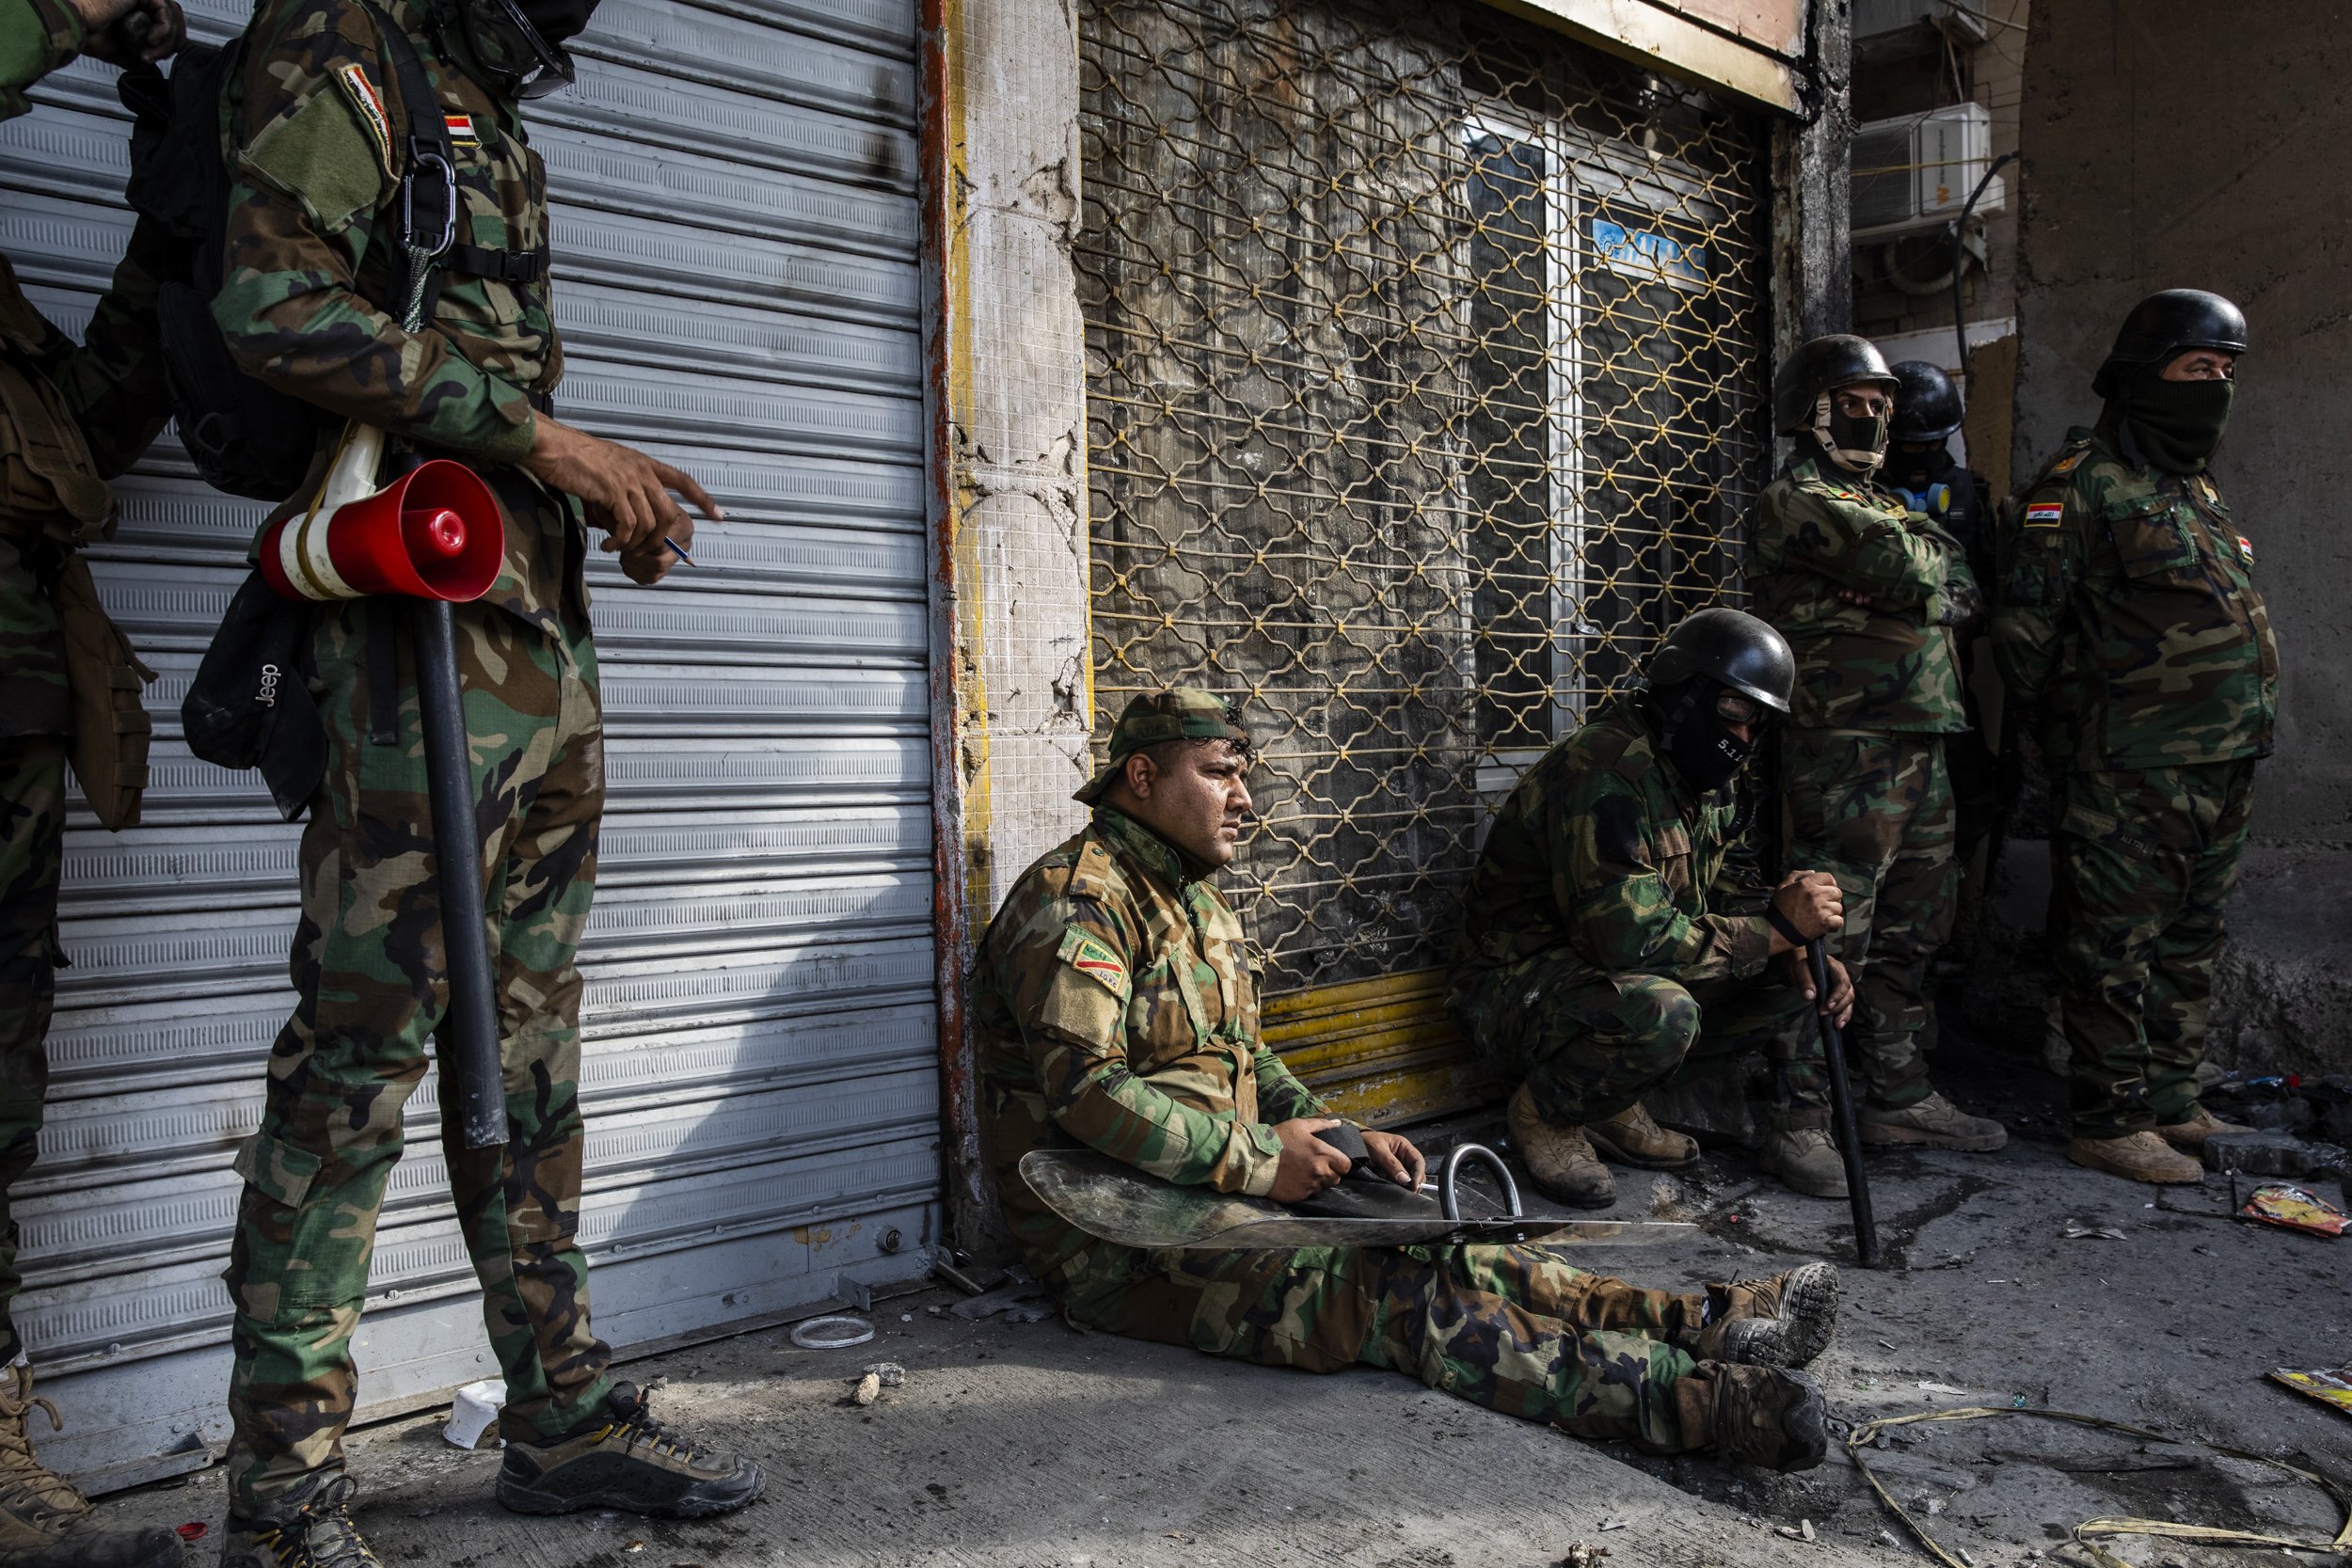  Iraqi security forces soldiers rested during clashes with groups of mainly teenage boys . 